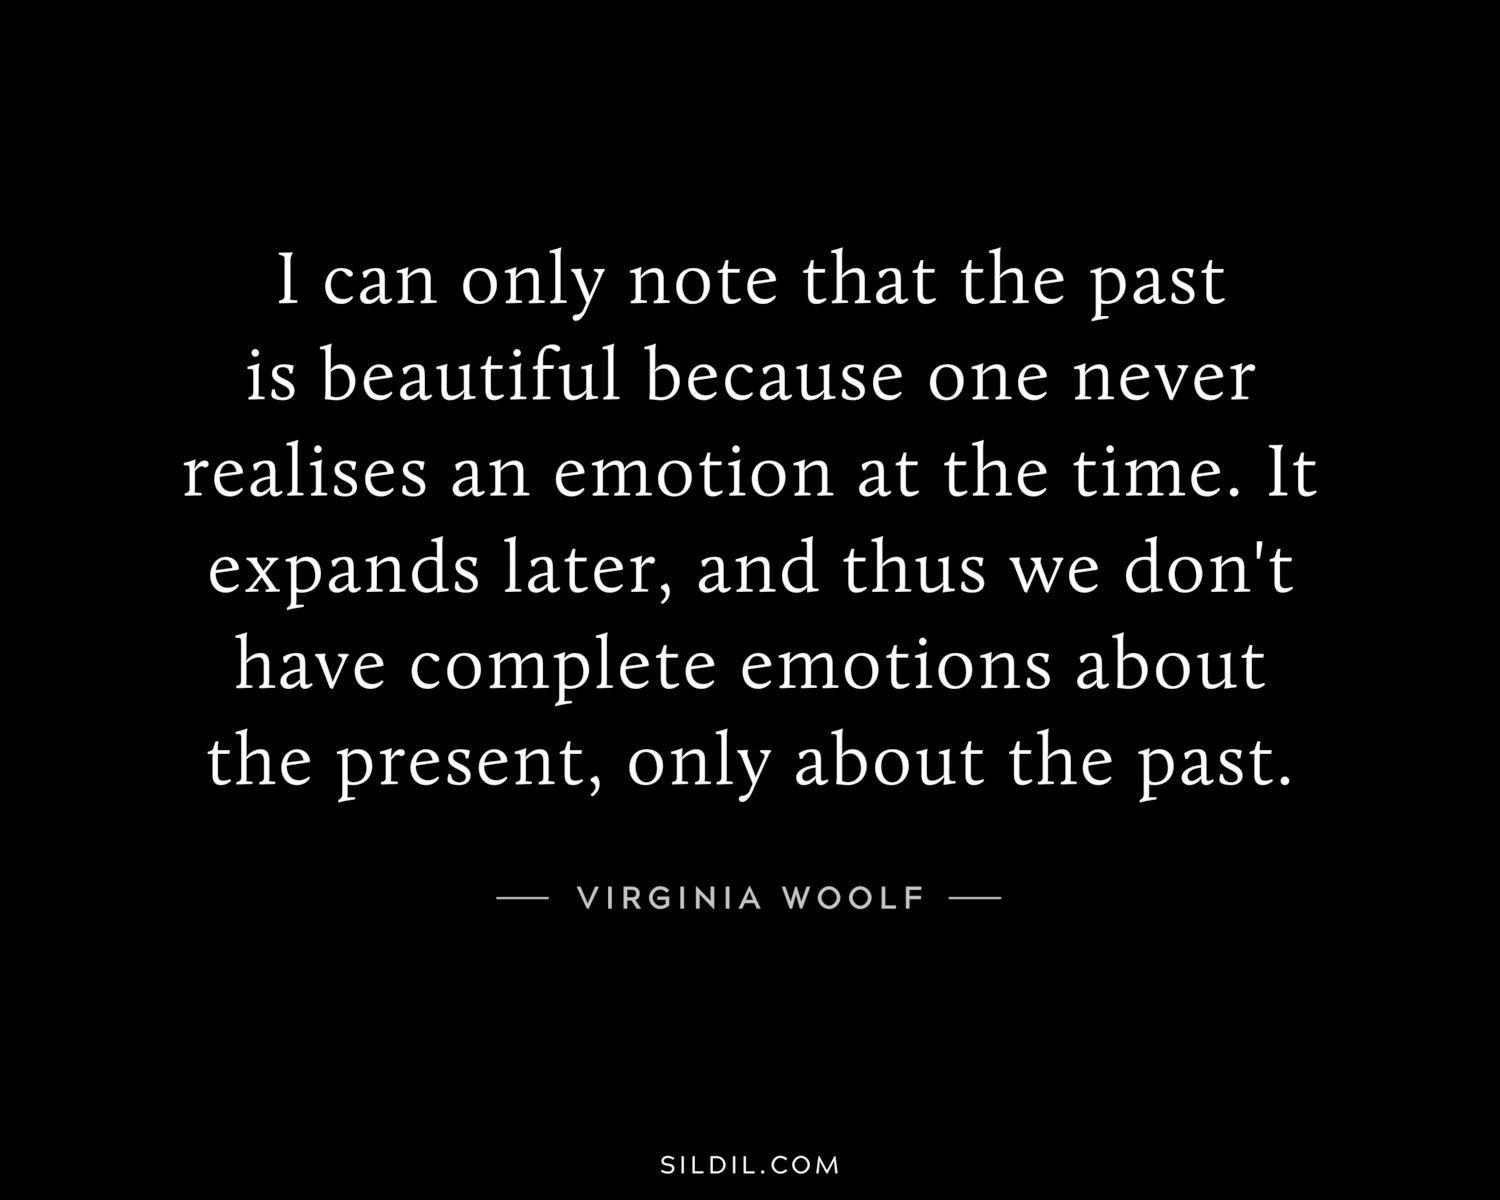 I can only note that the past is beautiful because one never realises an emotion at the time. It expands later, and thus we don't have complete emotions about the present, only about the past.